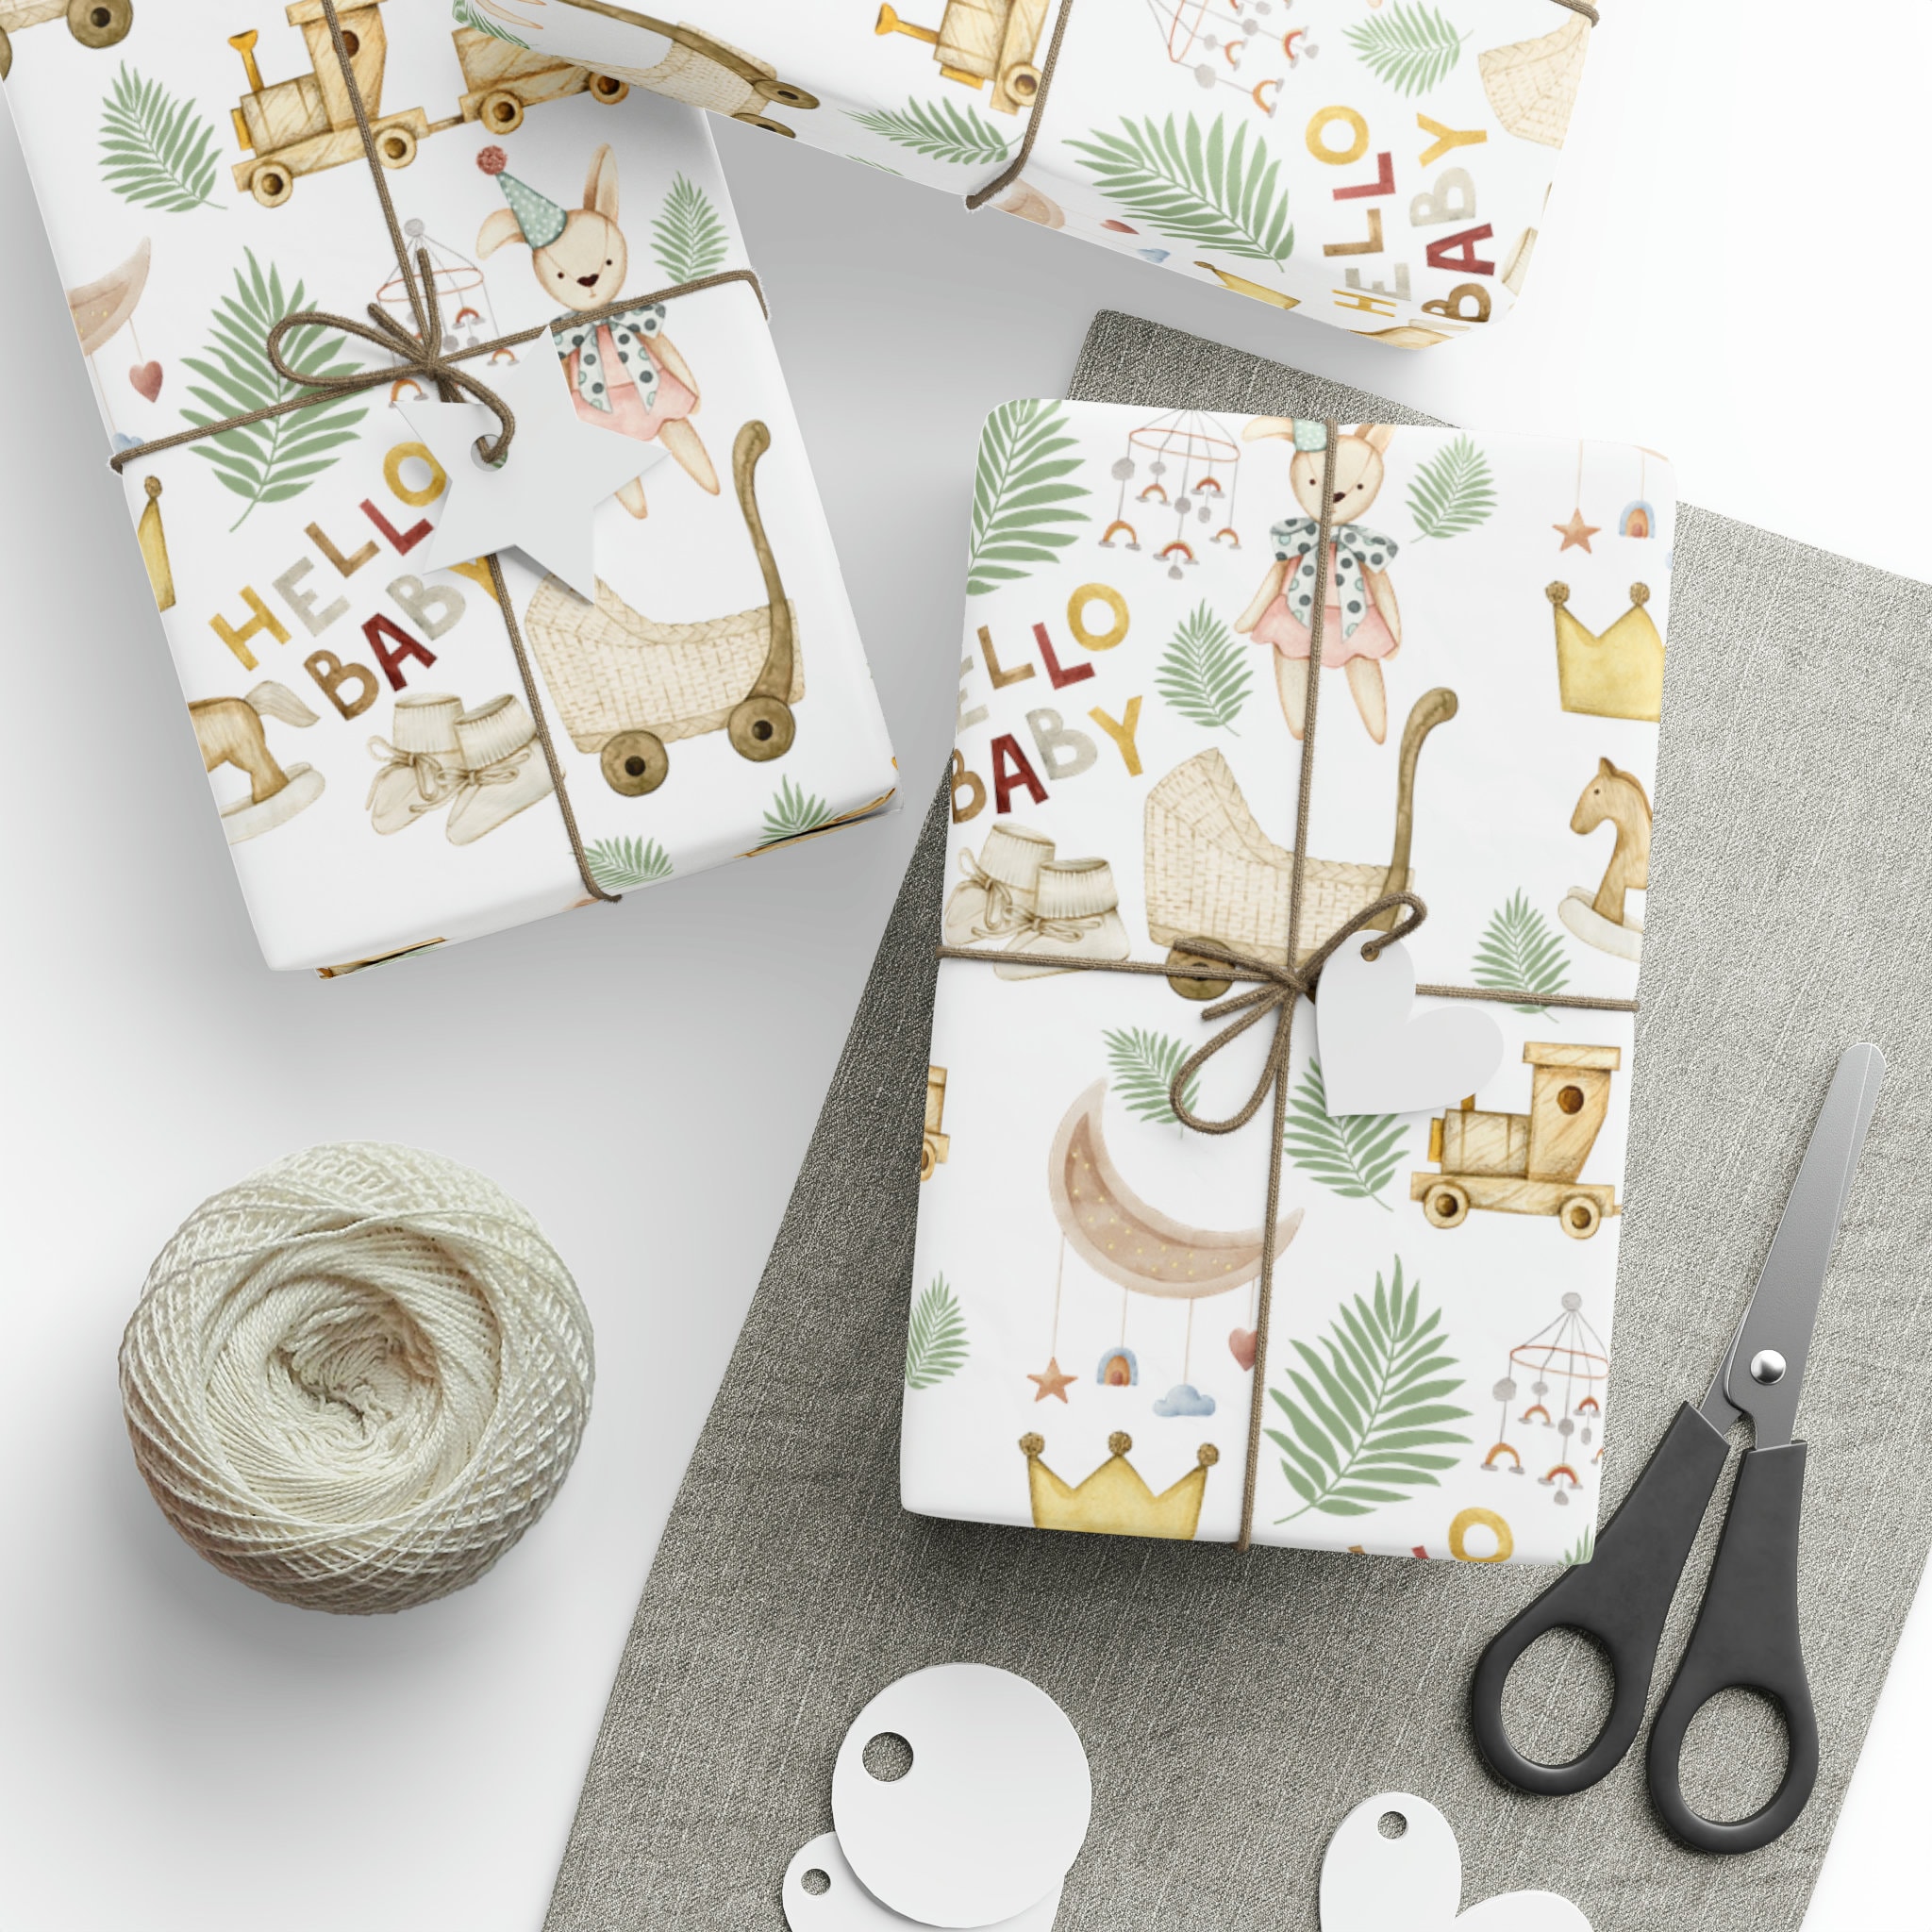 Baby Shower Large Wrapping Paper Rolls